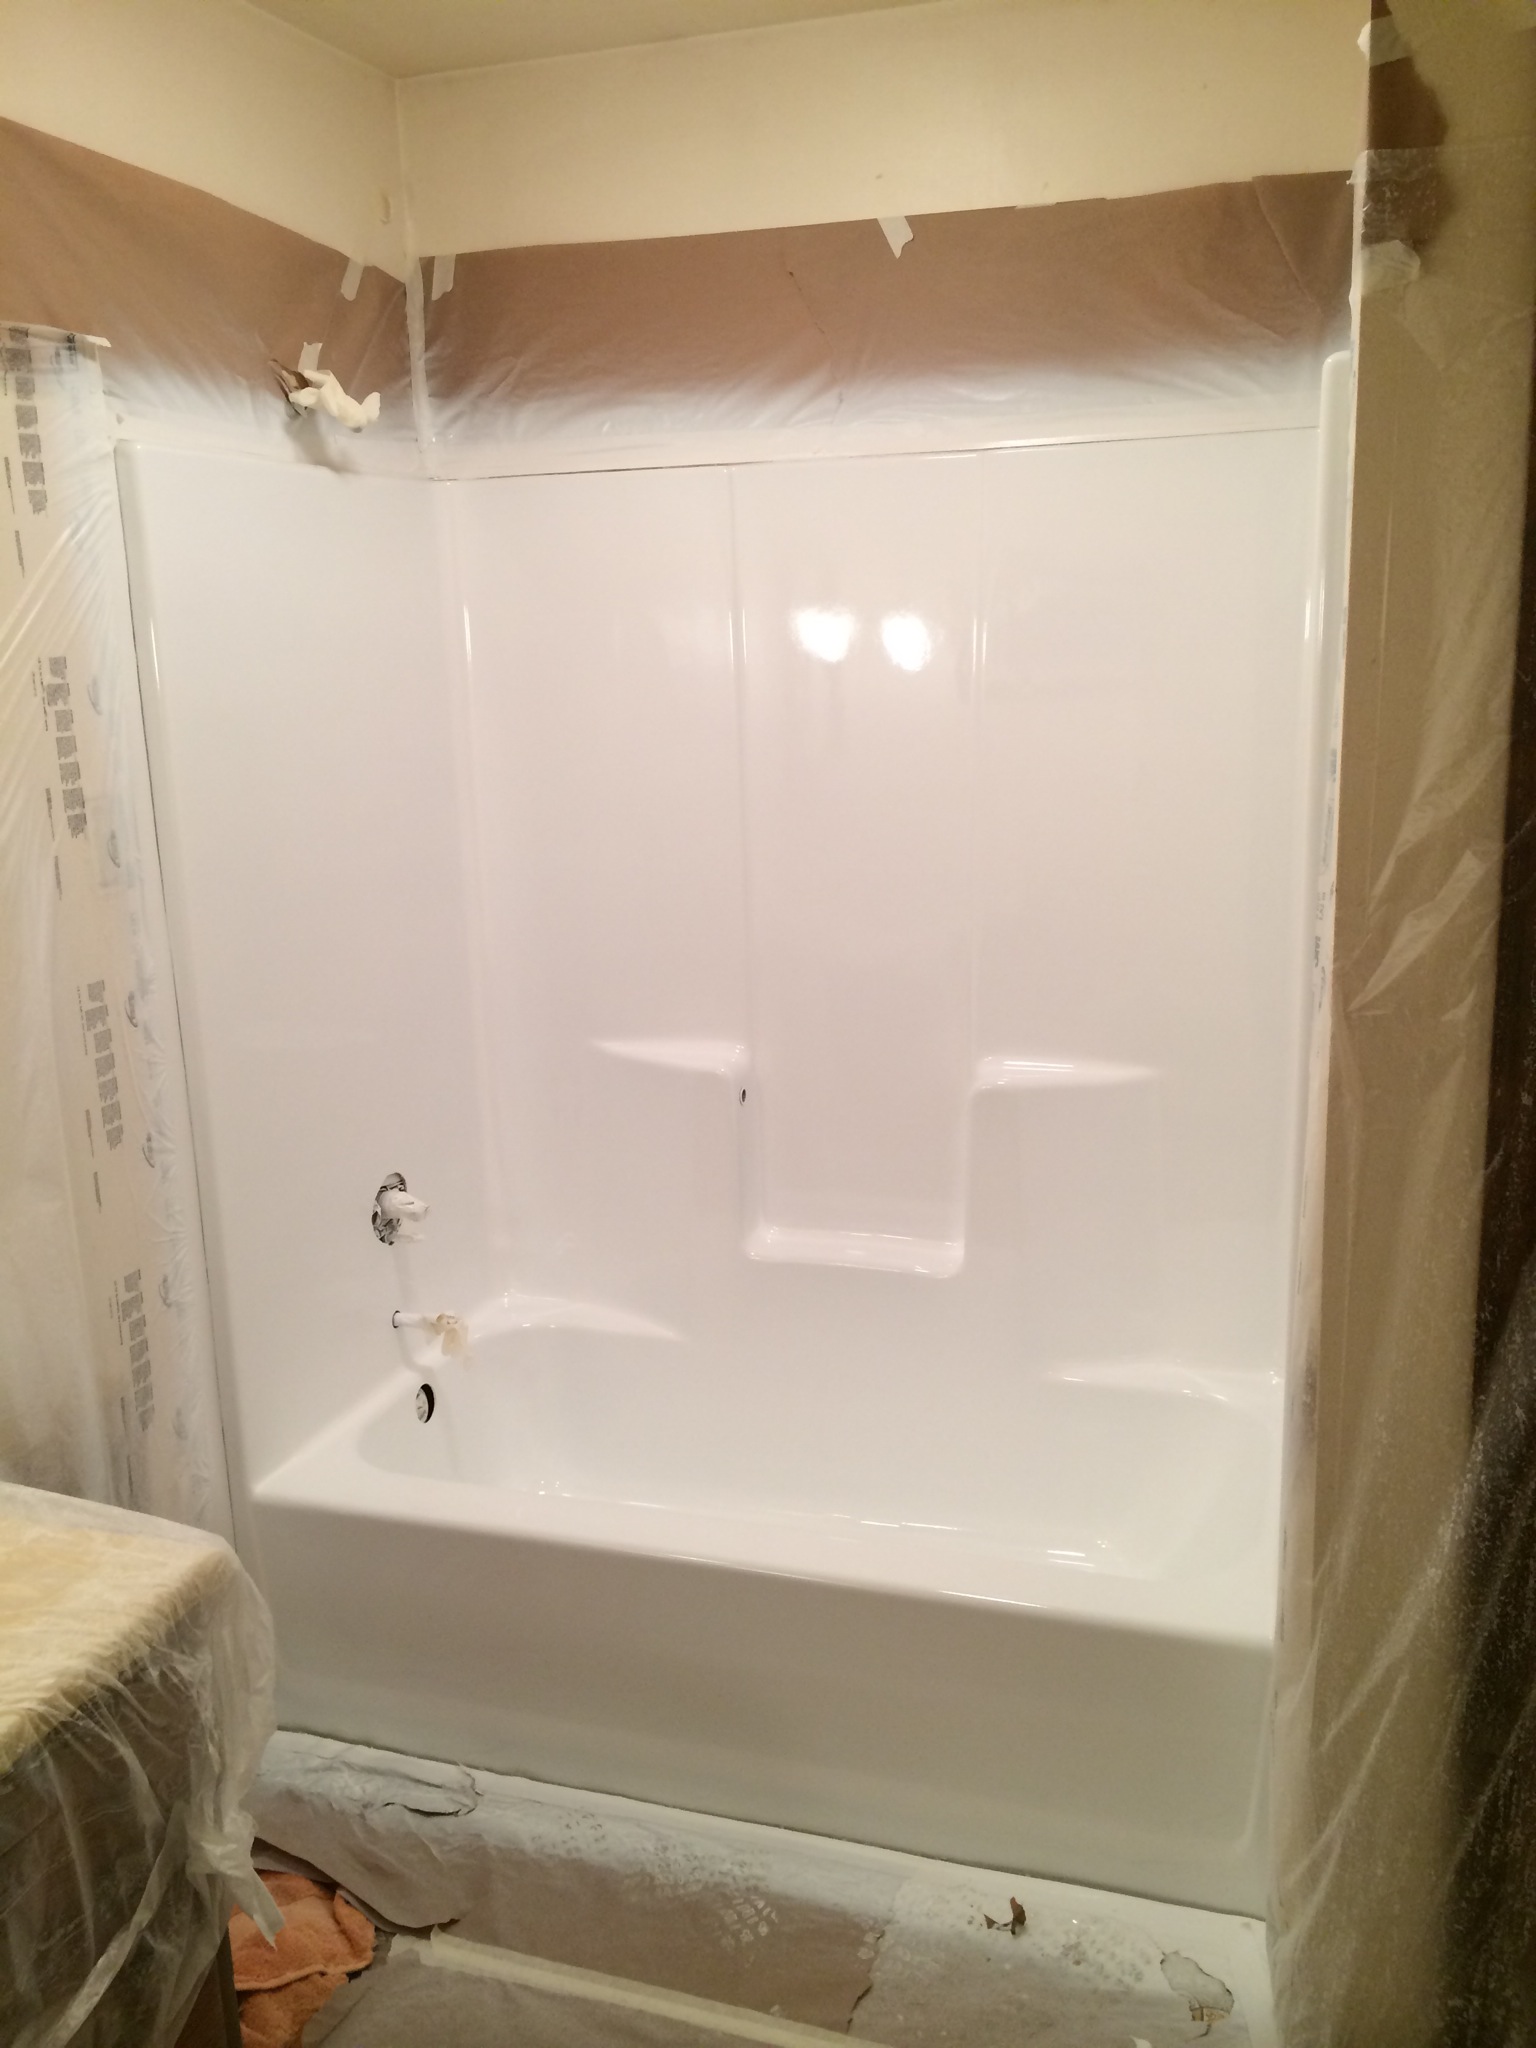 Can A Fiberglass Tub Be Resurfaced, How Much Does It Cost To Refinish A Fiberglass Bathtub